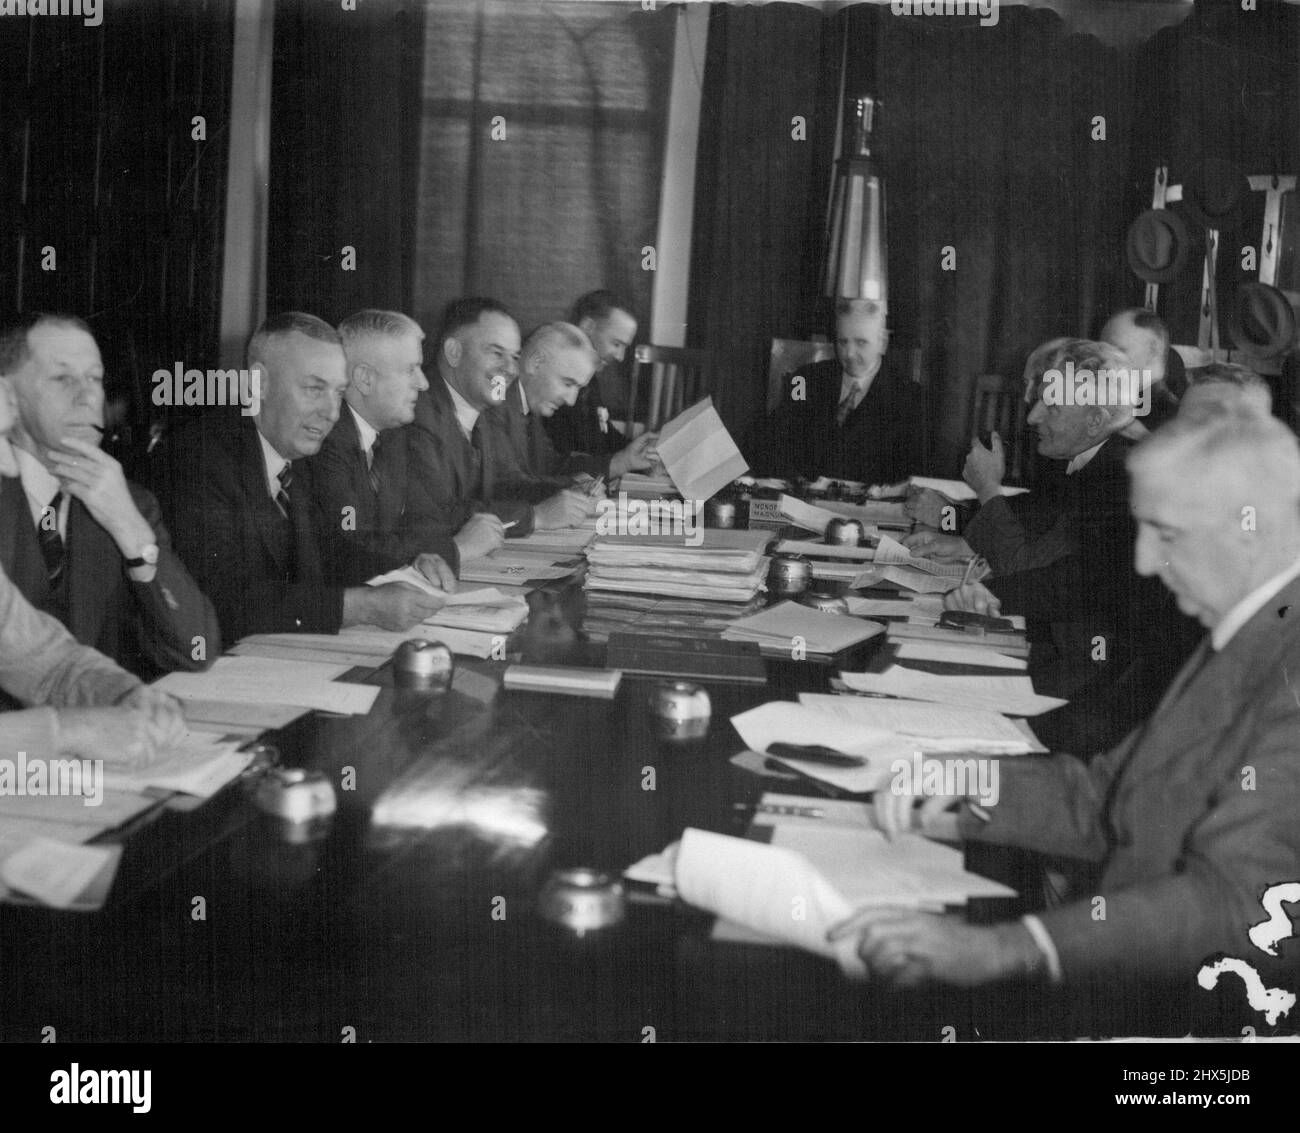 Australian Cricket 'Parliament,' the Board of control, in session in the V.C.A. Building today. There have been elaborate preparations for this important meeting which faced an agenda with more than 70 items. From left (round the table): Messrs. Clem Hill (S.A.), R. F. Middleton (S.A.), H. W. Hodgetts (S.A.), K. O. Johnstone (N.s.W.), R. A. Oxlade (N.S.W.), F. M. Cush (N.S.W.), the chairman (Dr. Allen Robertson), the secretary of the Board and Manager of the team (Mr. W. H. Jeanes (S.A..), the acting-secretary, ( Mr. H. Heydon, N.S.W.), Dr. R. L. Morton (Vic.), and Messrs H. A. Bussell (Vic.) Stock Photo